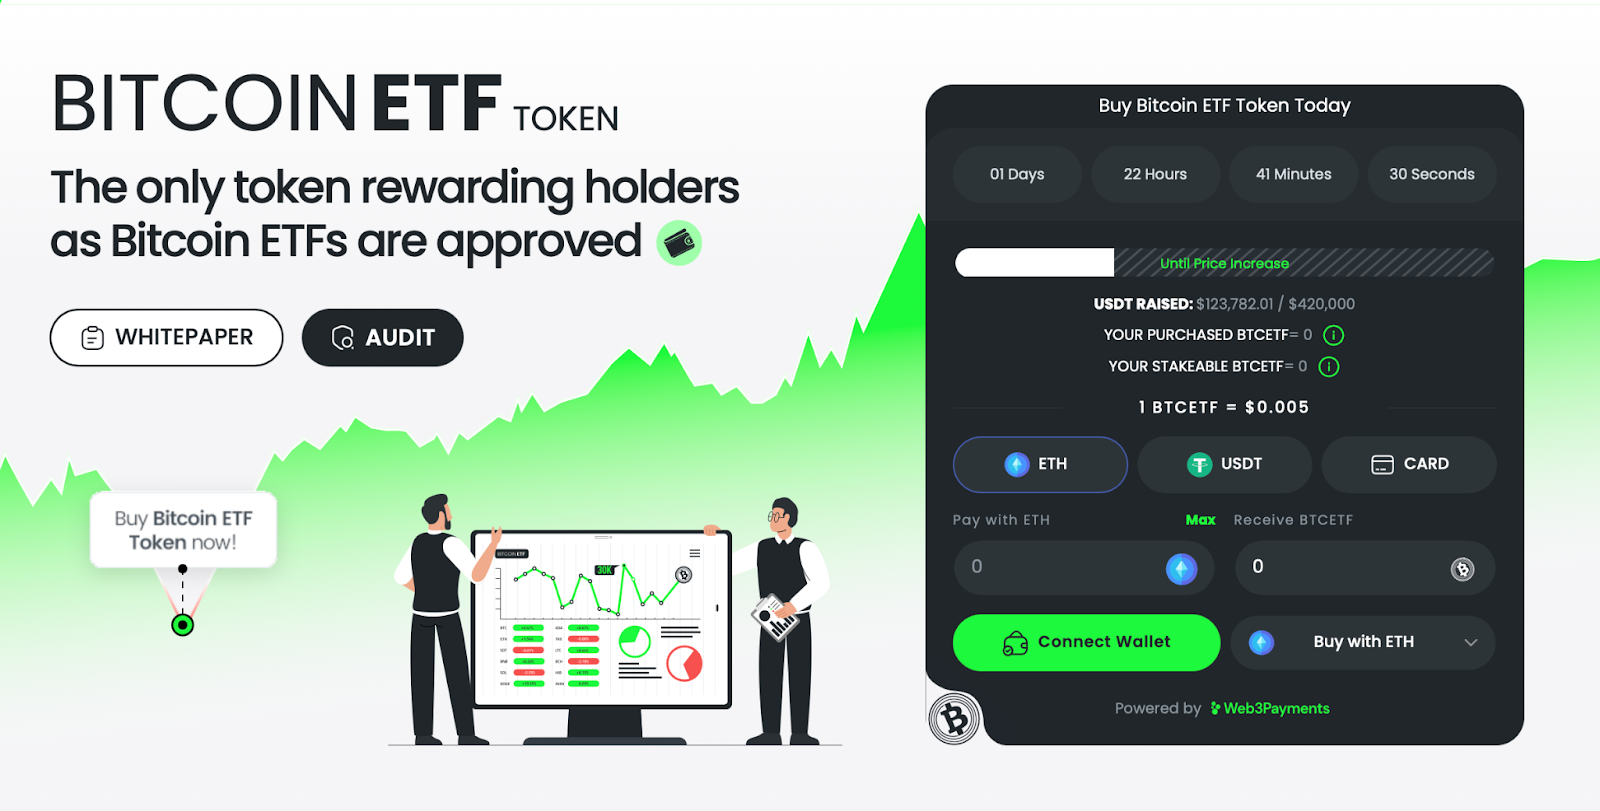 Bitcoin ETF Token Crosses $100K With BTC Price Surge – 1 Day Left in the Presale Stage 